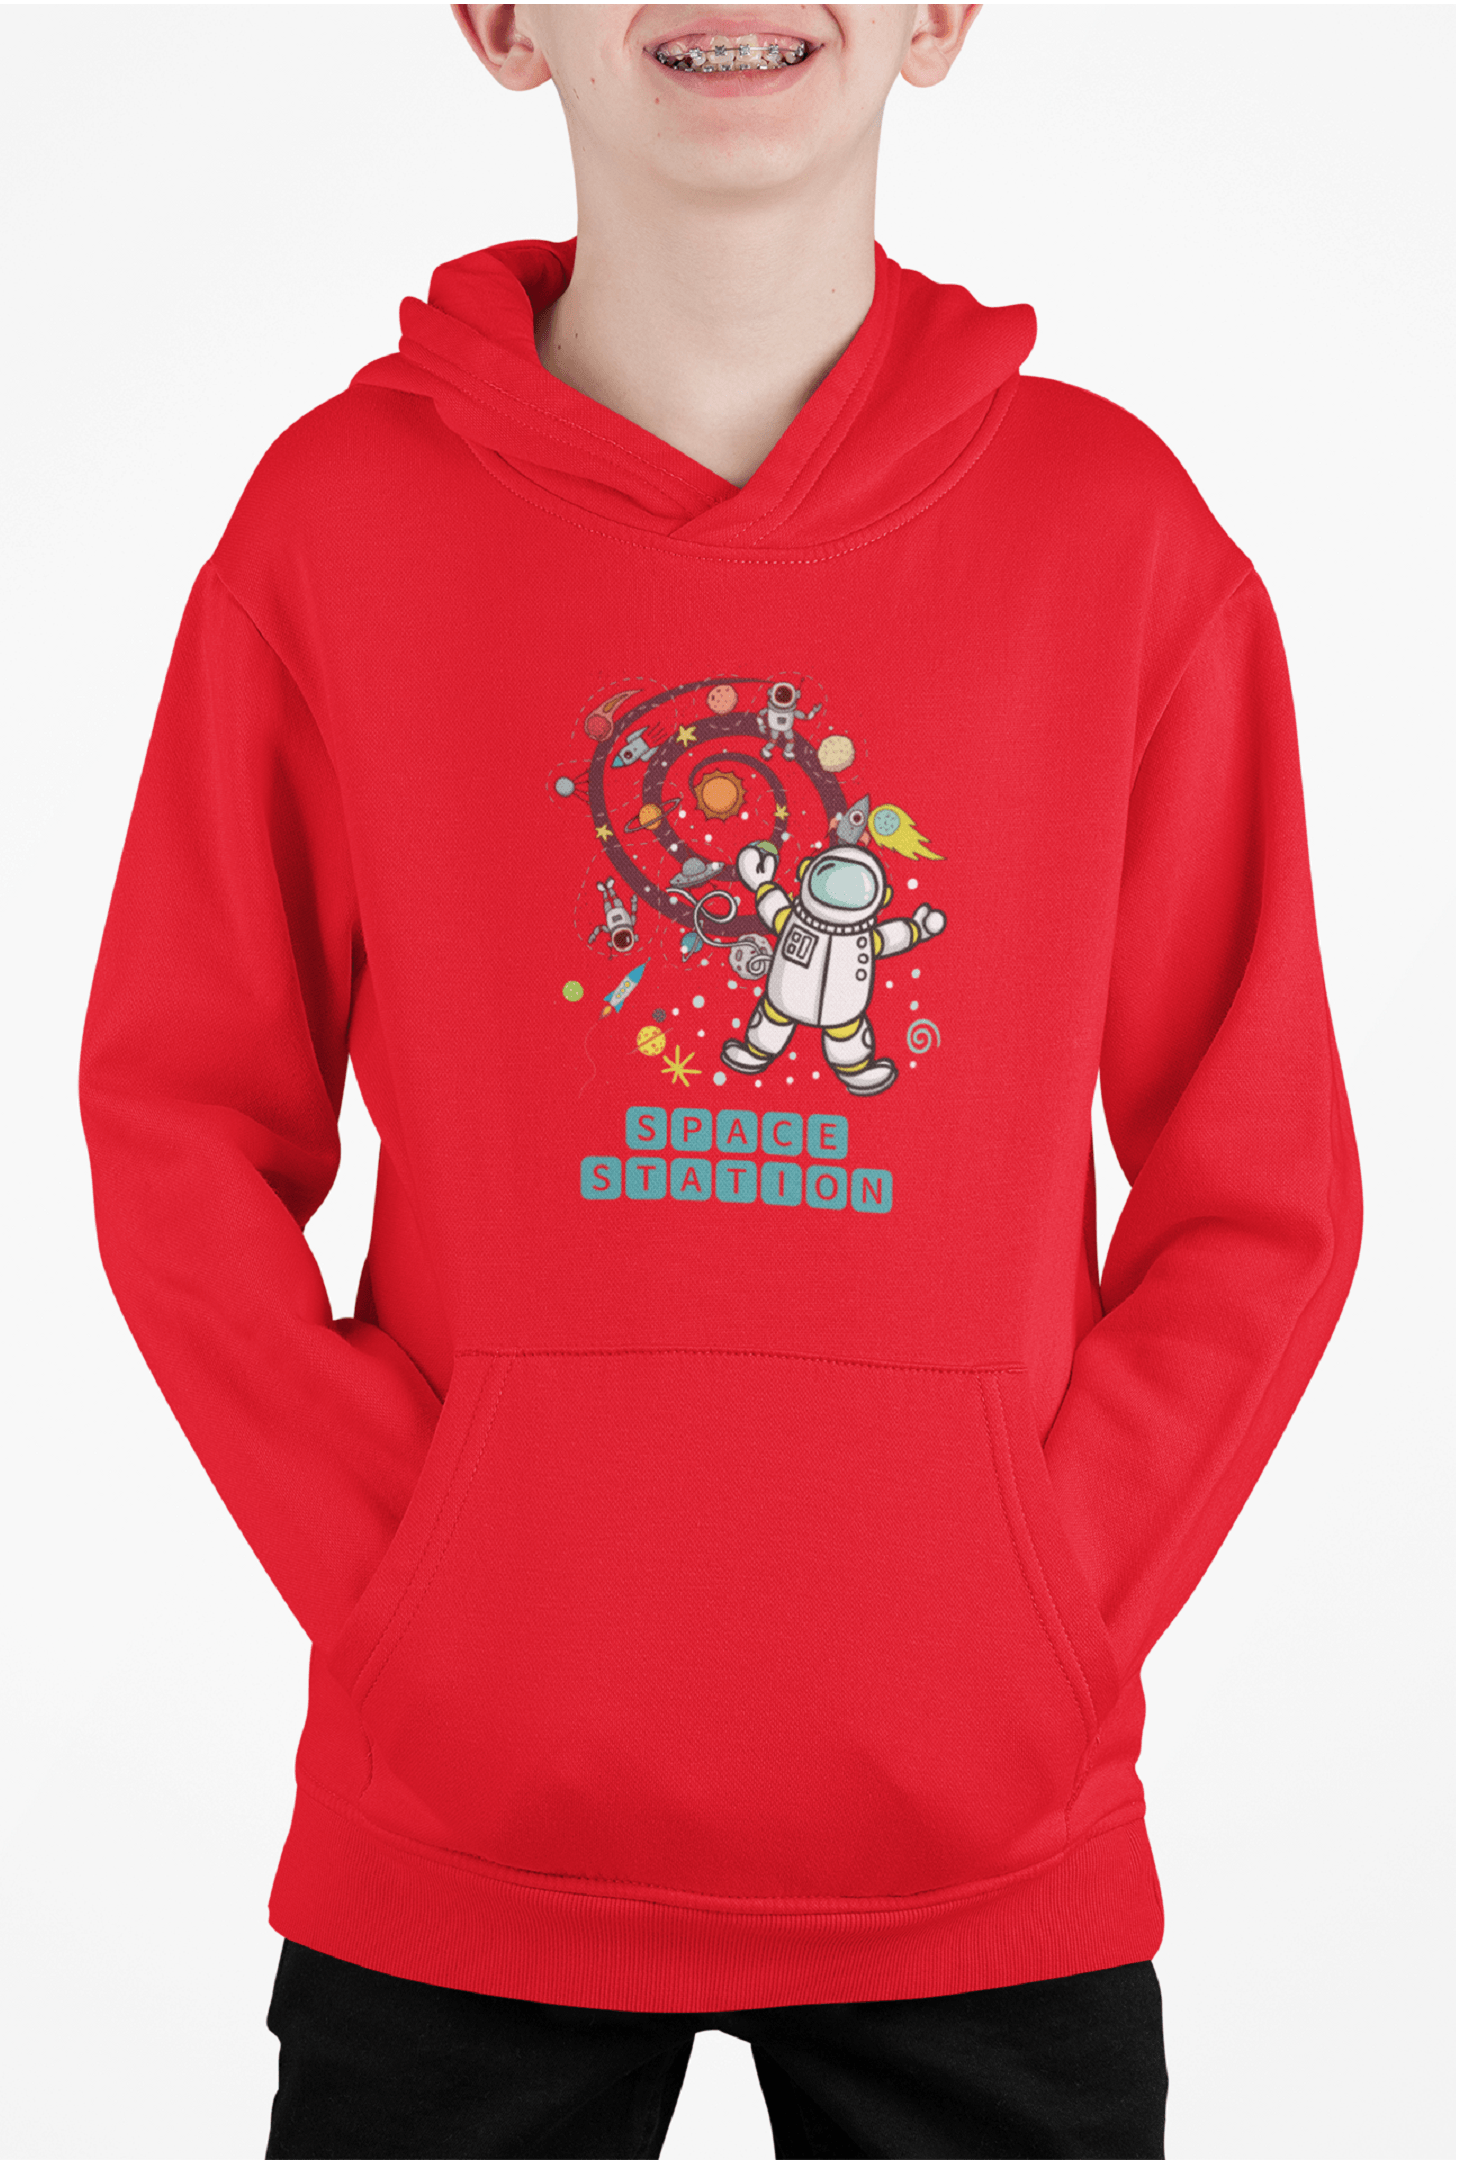 Red Hoodie for Kids with Astronaut Space Design